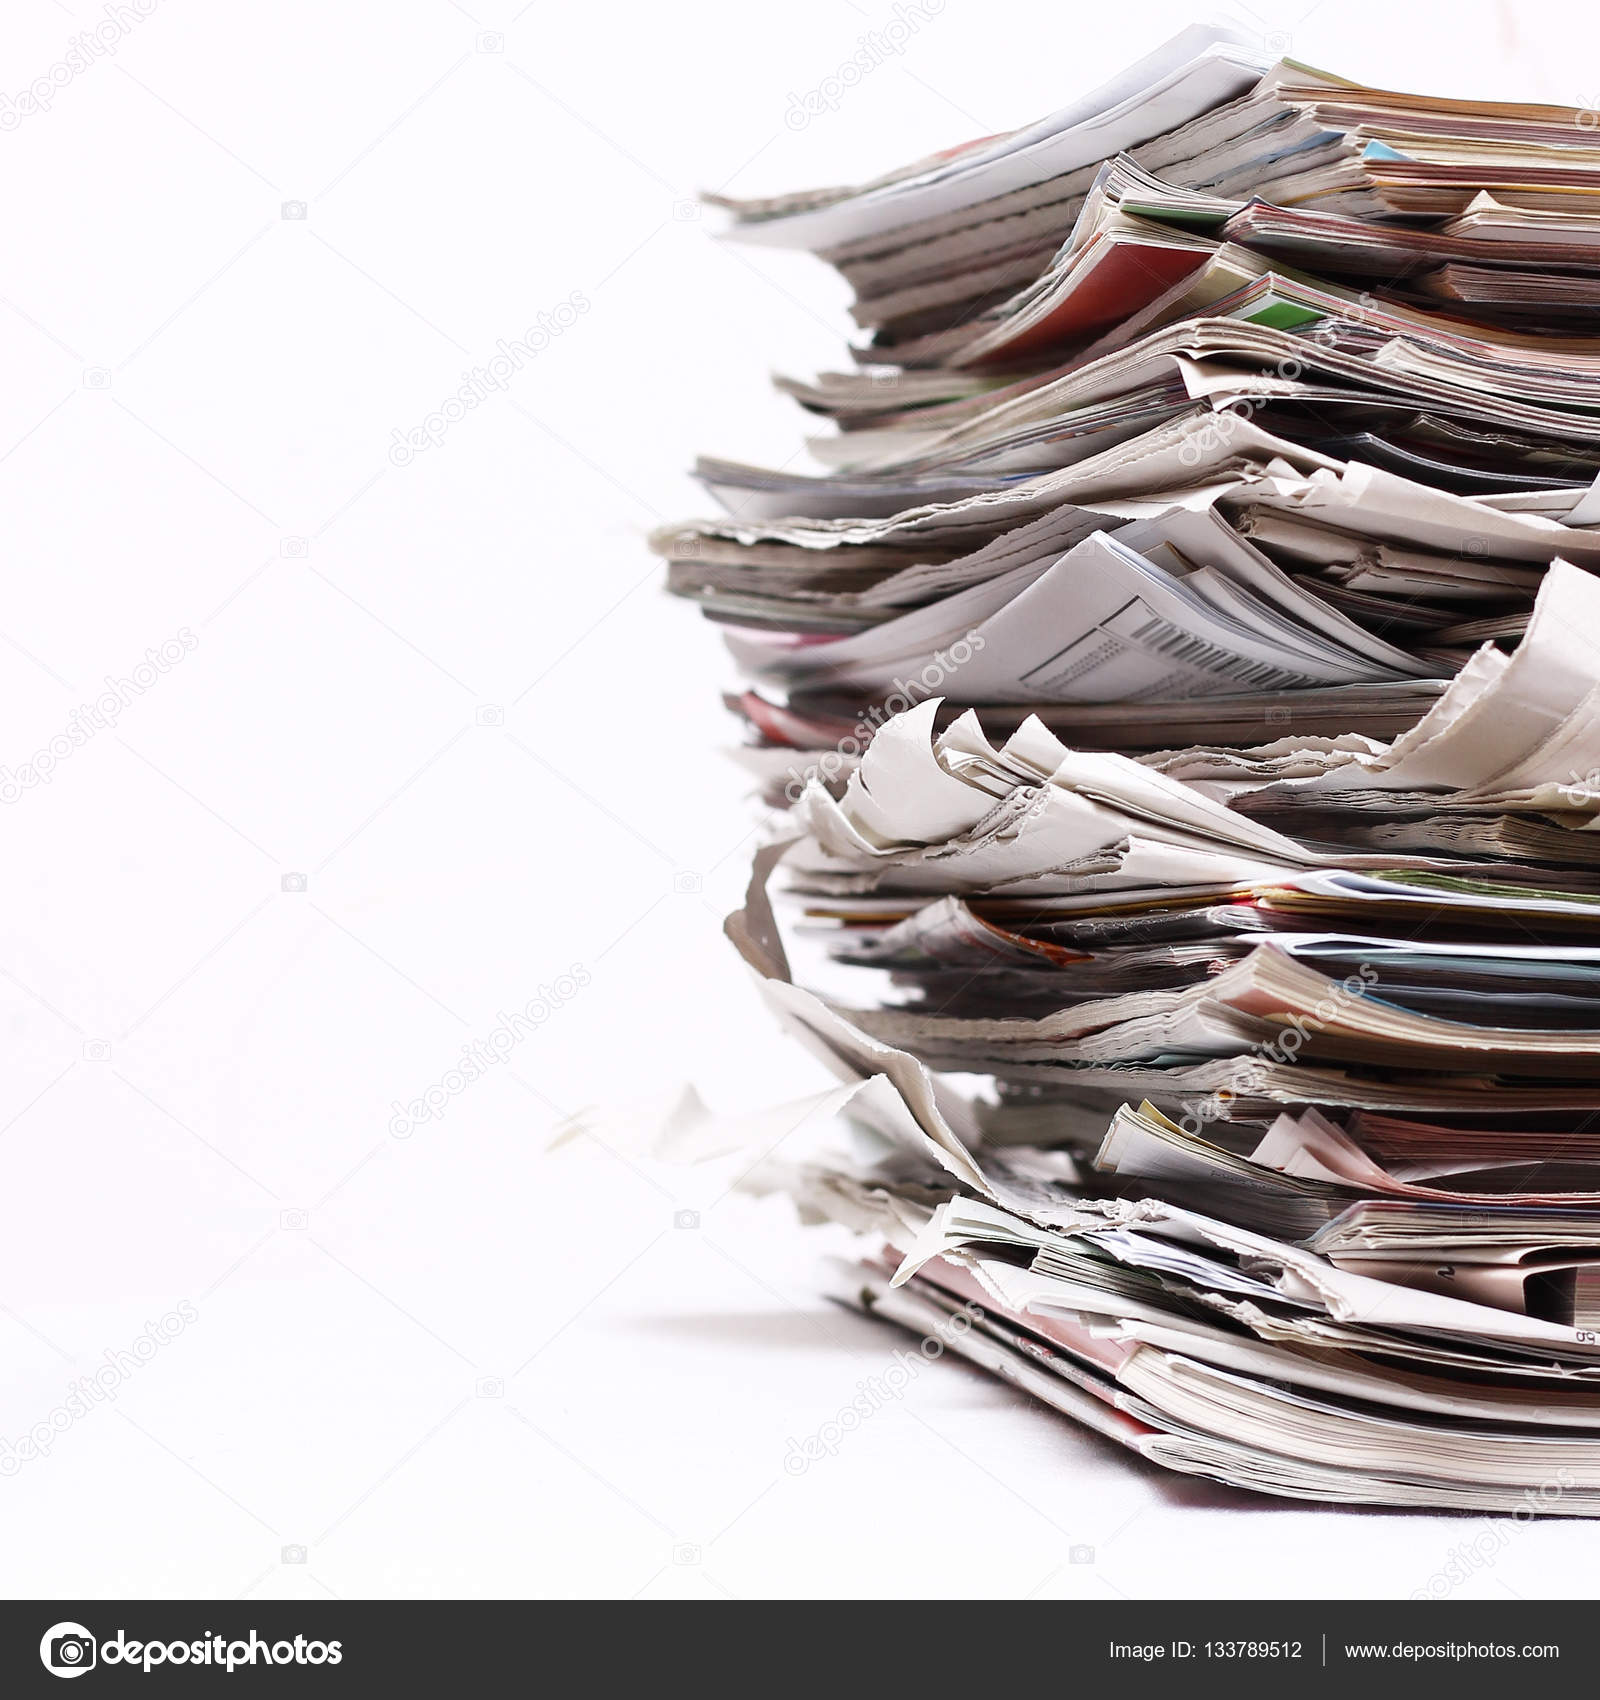 stack of newspapers — Stock Photo © noci #133789512